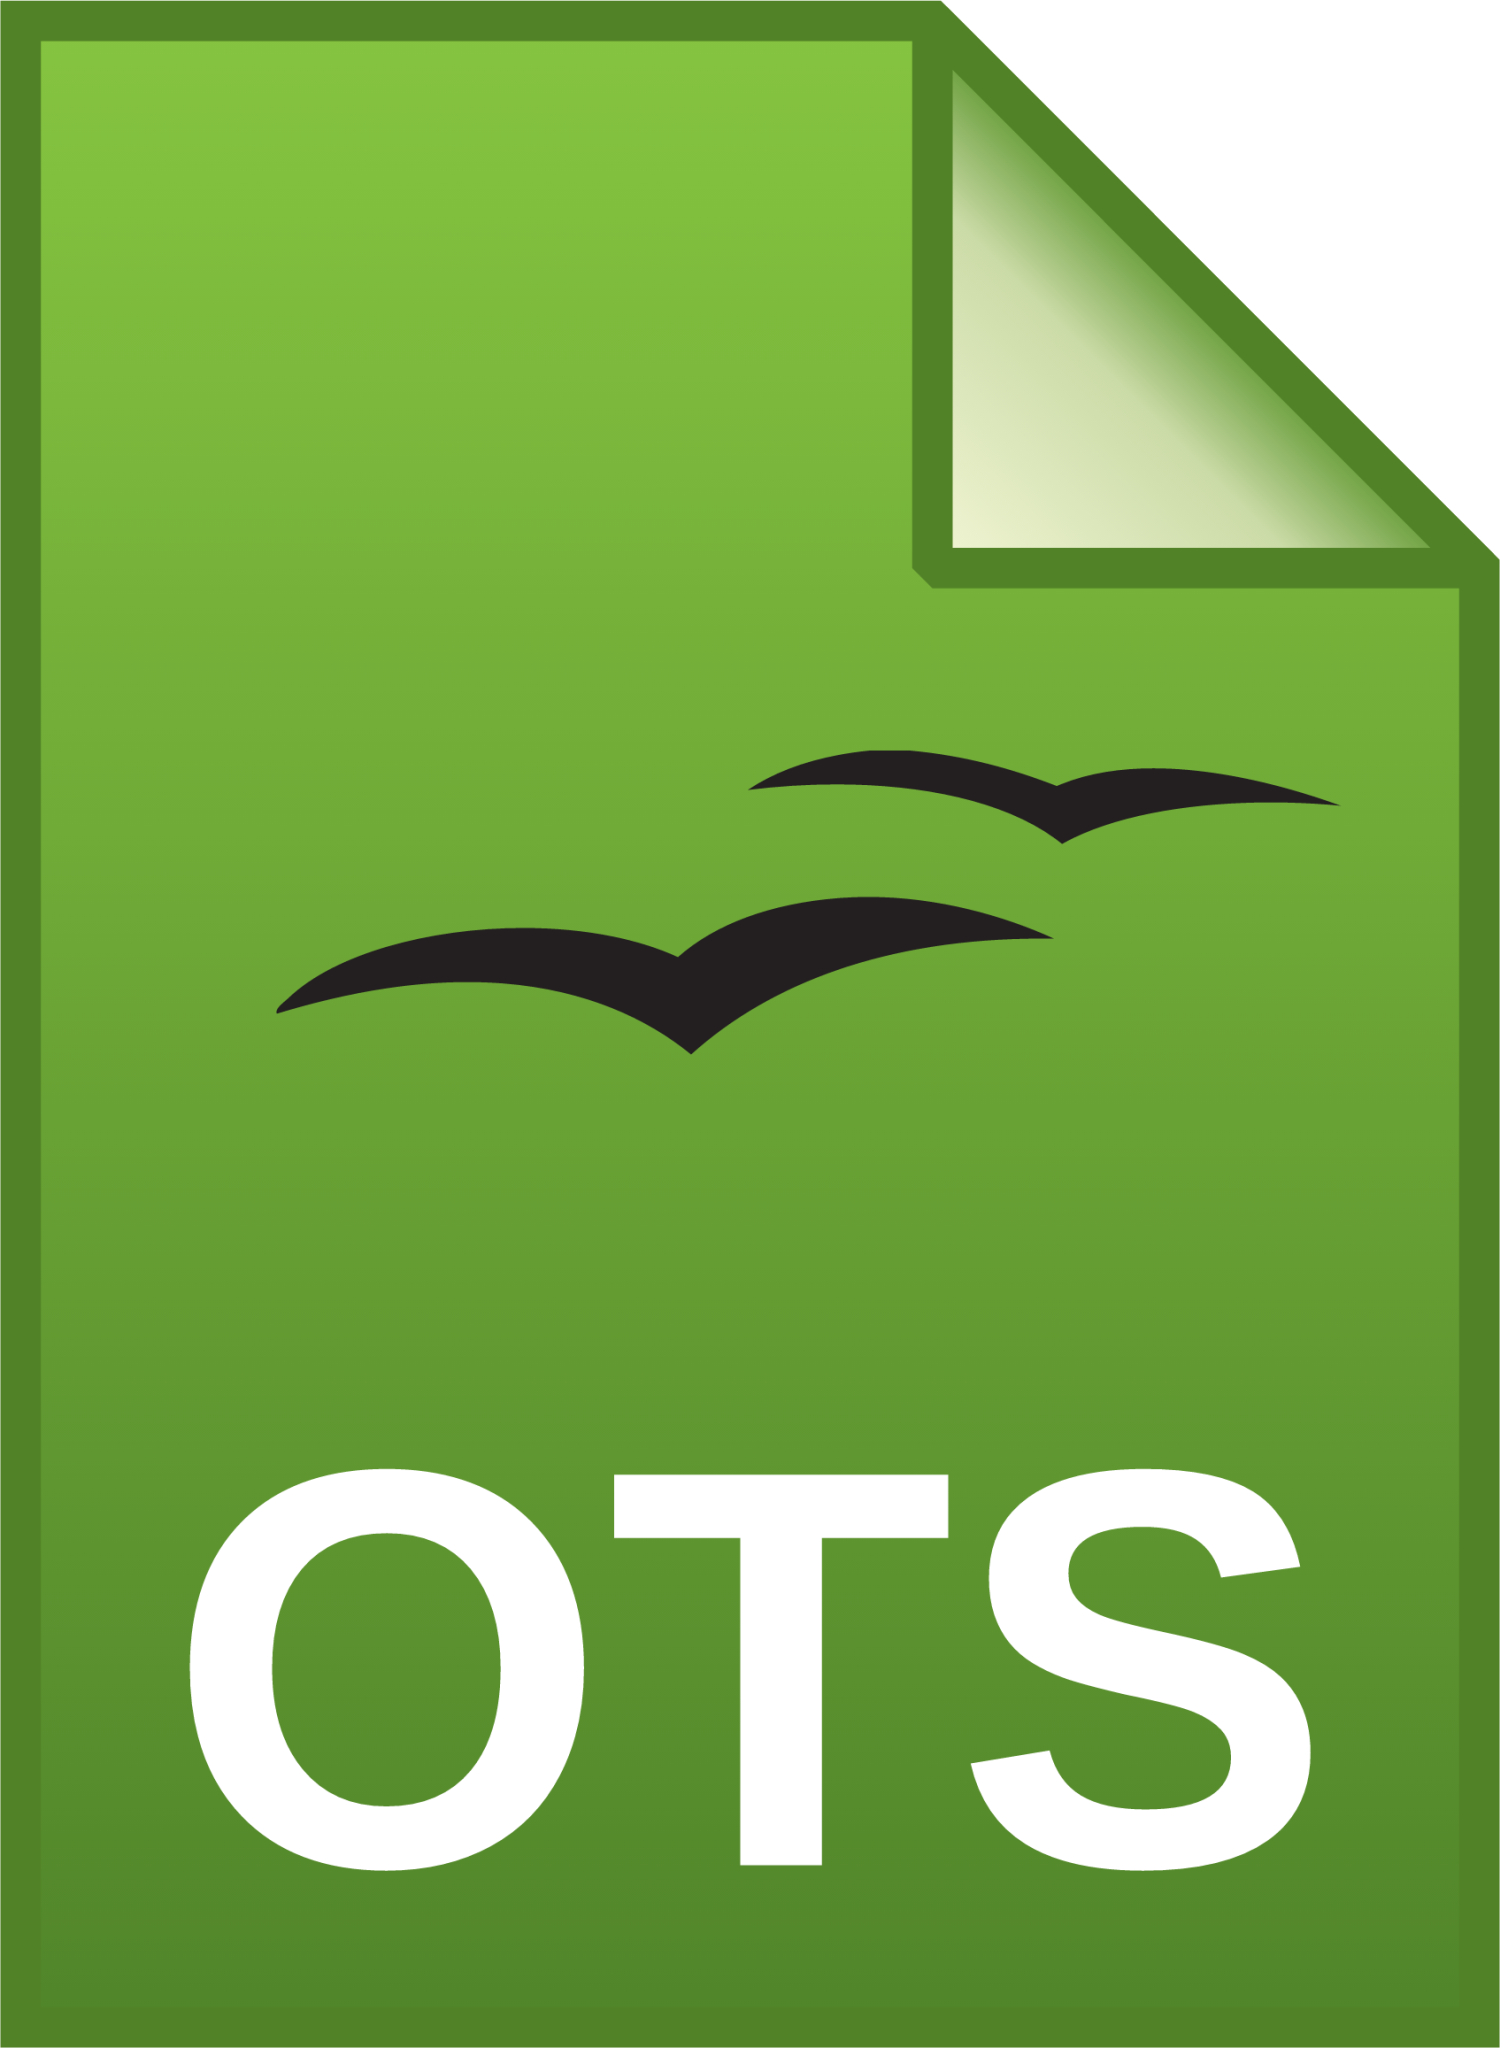 vnd oasis opendocument spreadsheet template icon